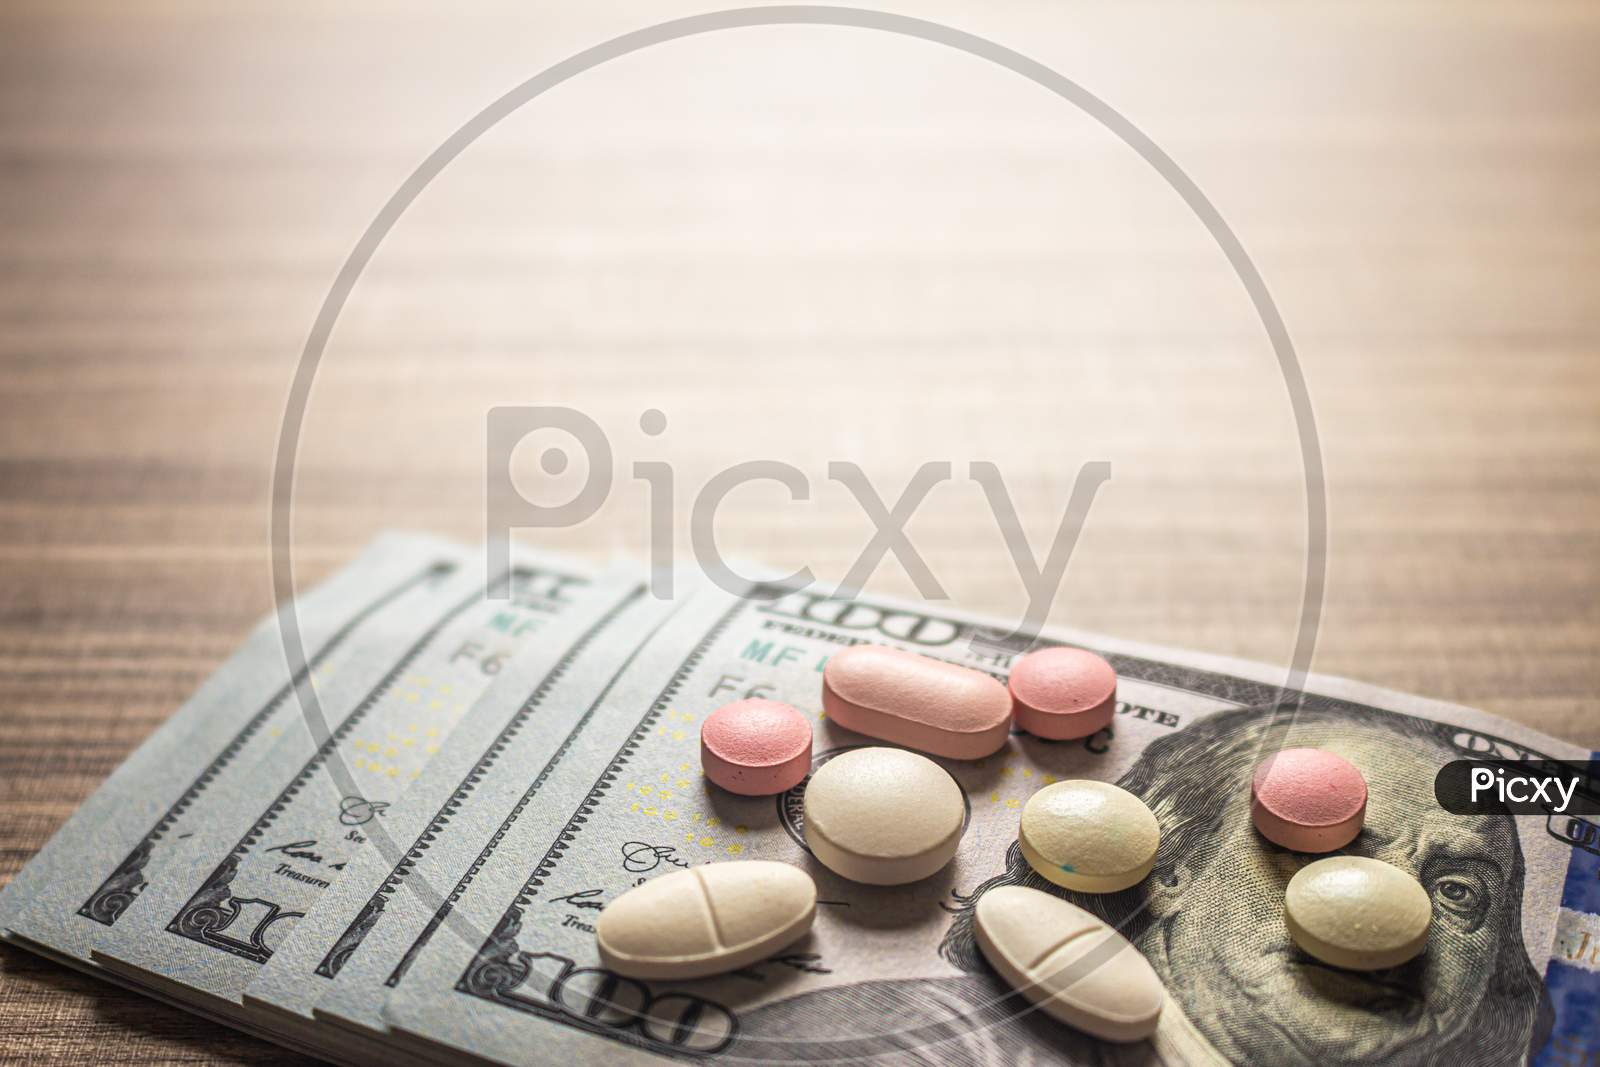 Concept Of Cost Of Medicines. Pills On A Brown Table With Bills.